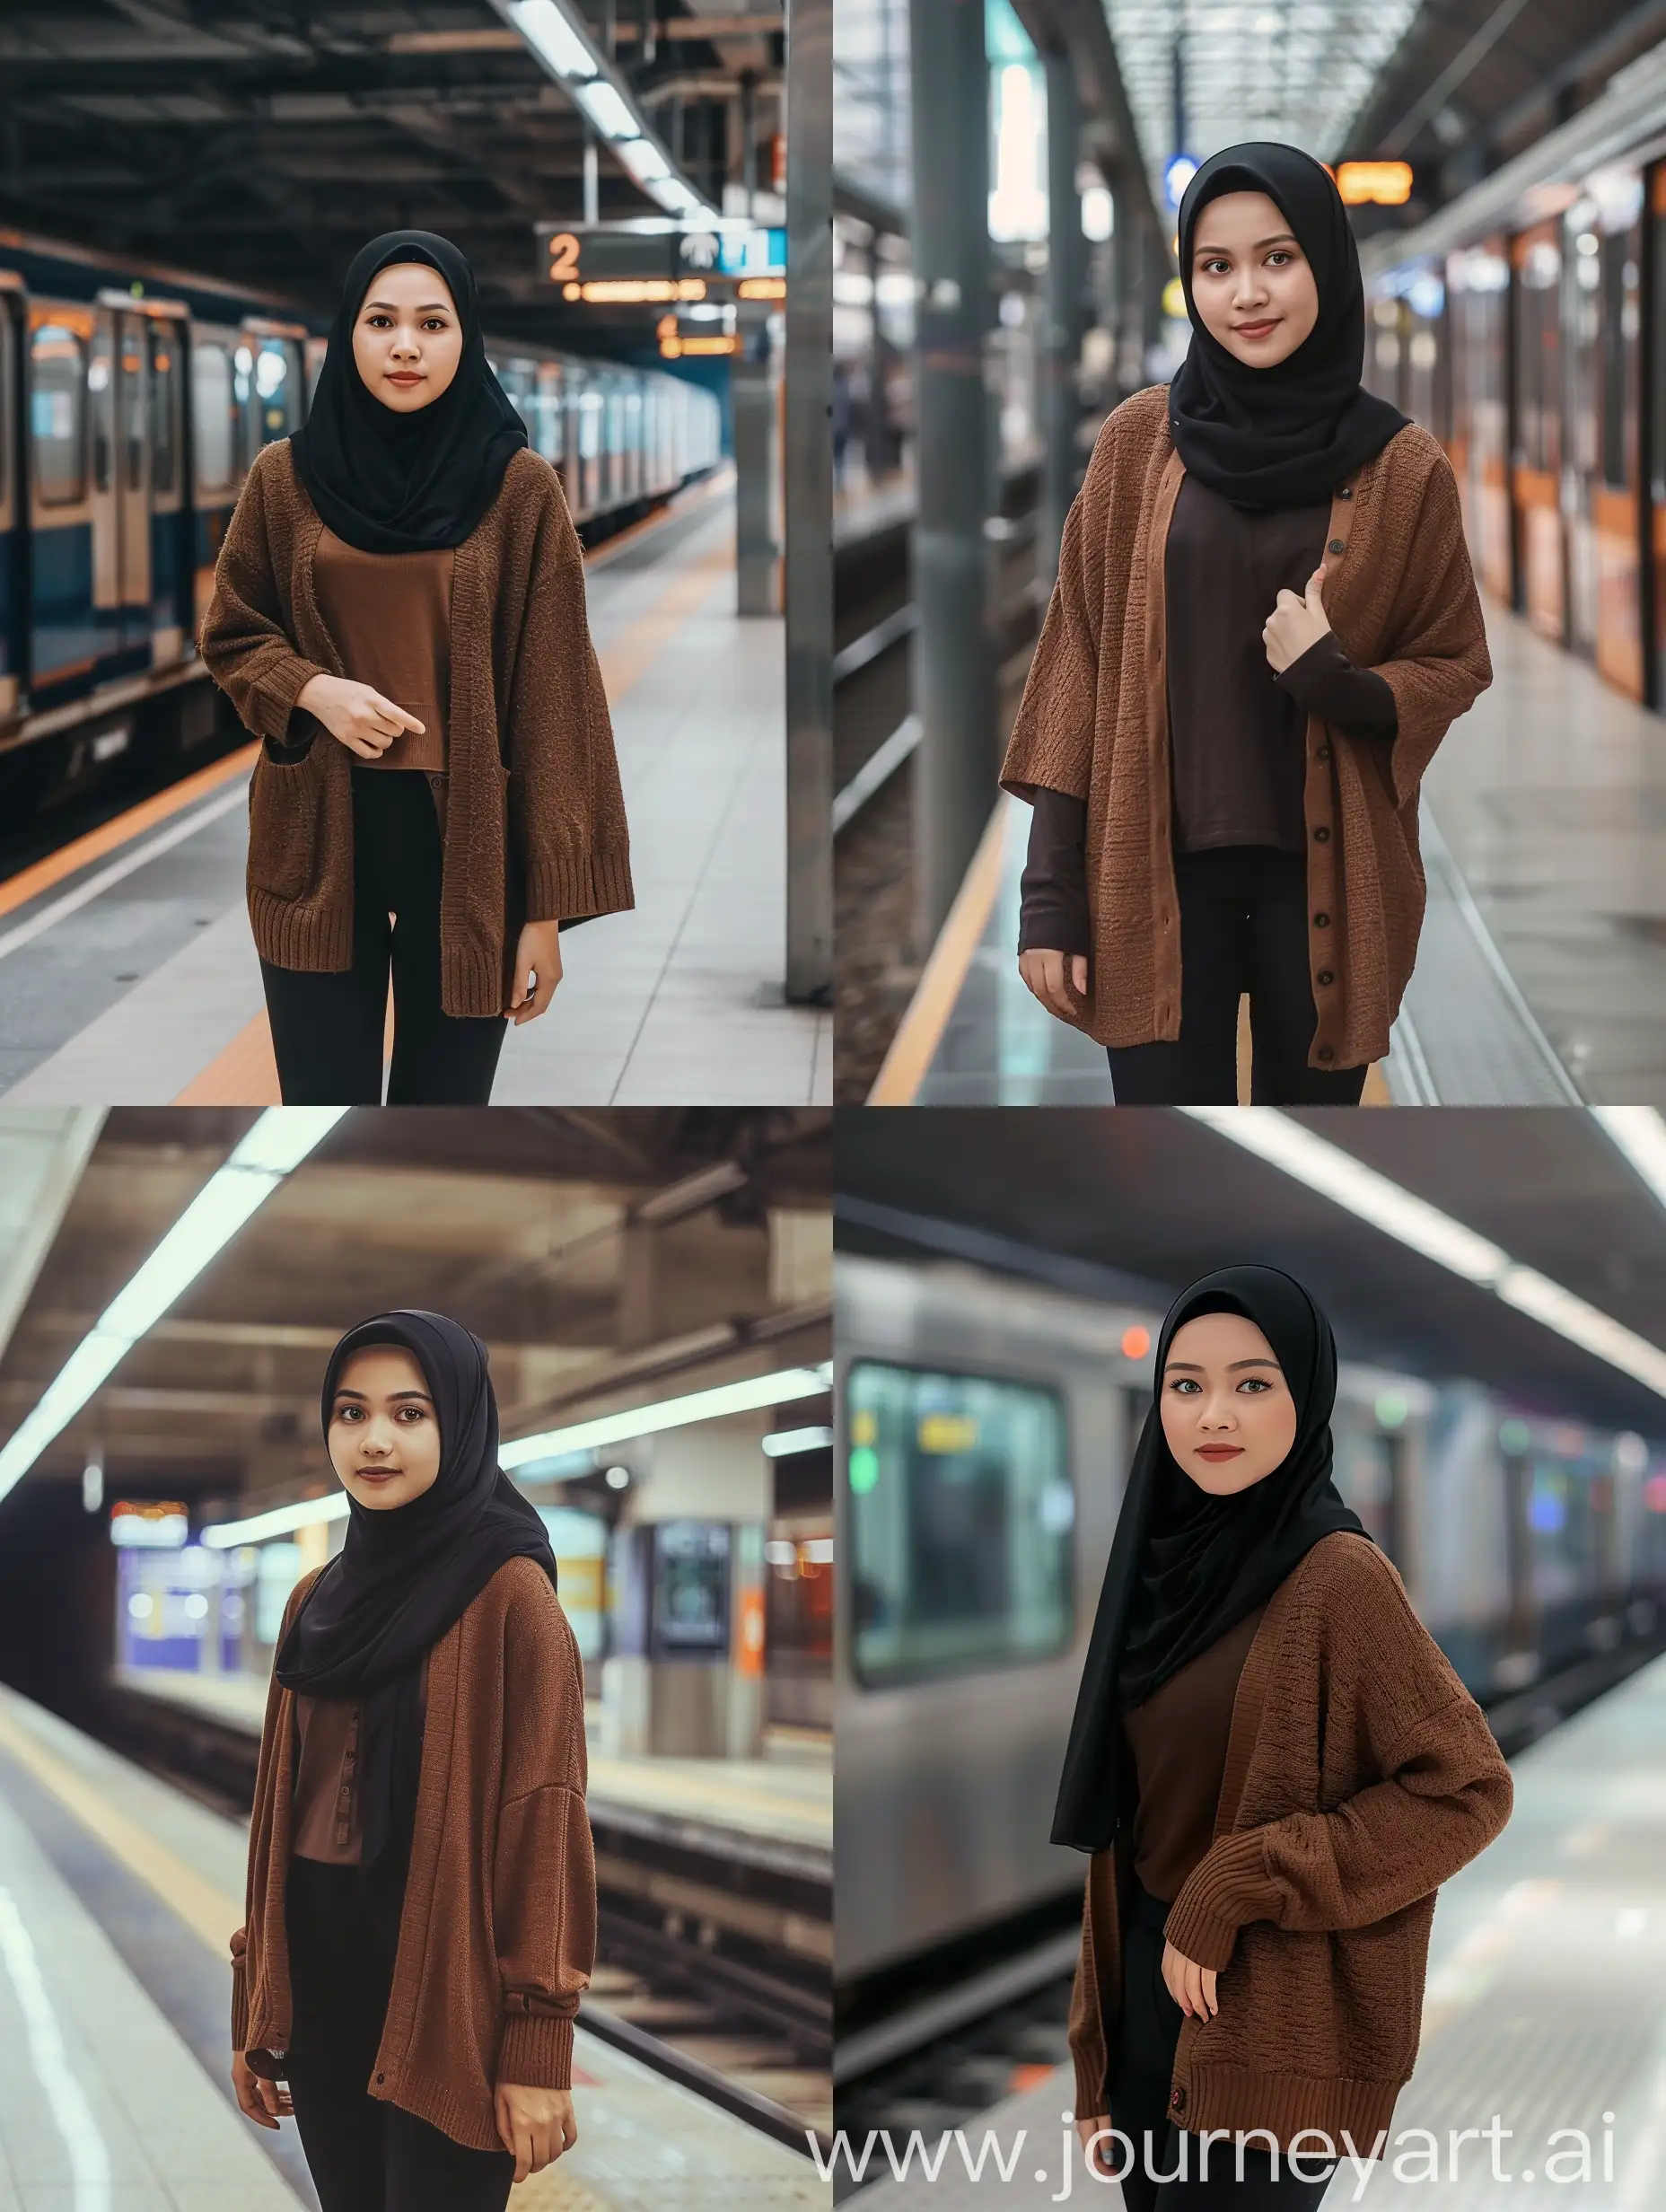 An indonesian woman wearing black hijab, wearing brown cardigan, and wearing black legging pants. Standing in a train station